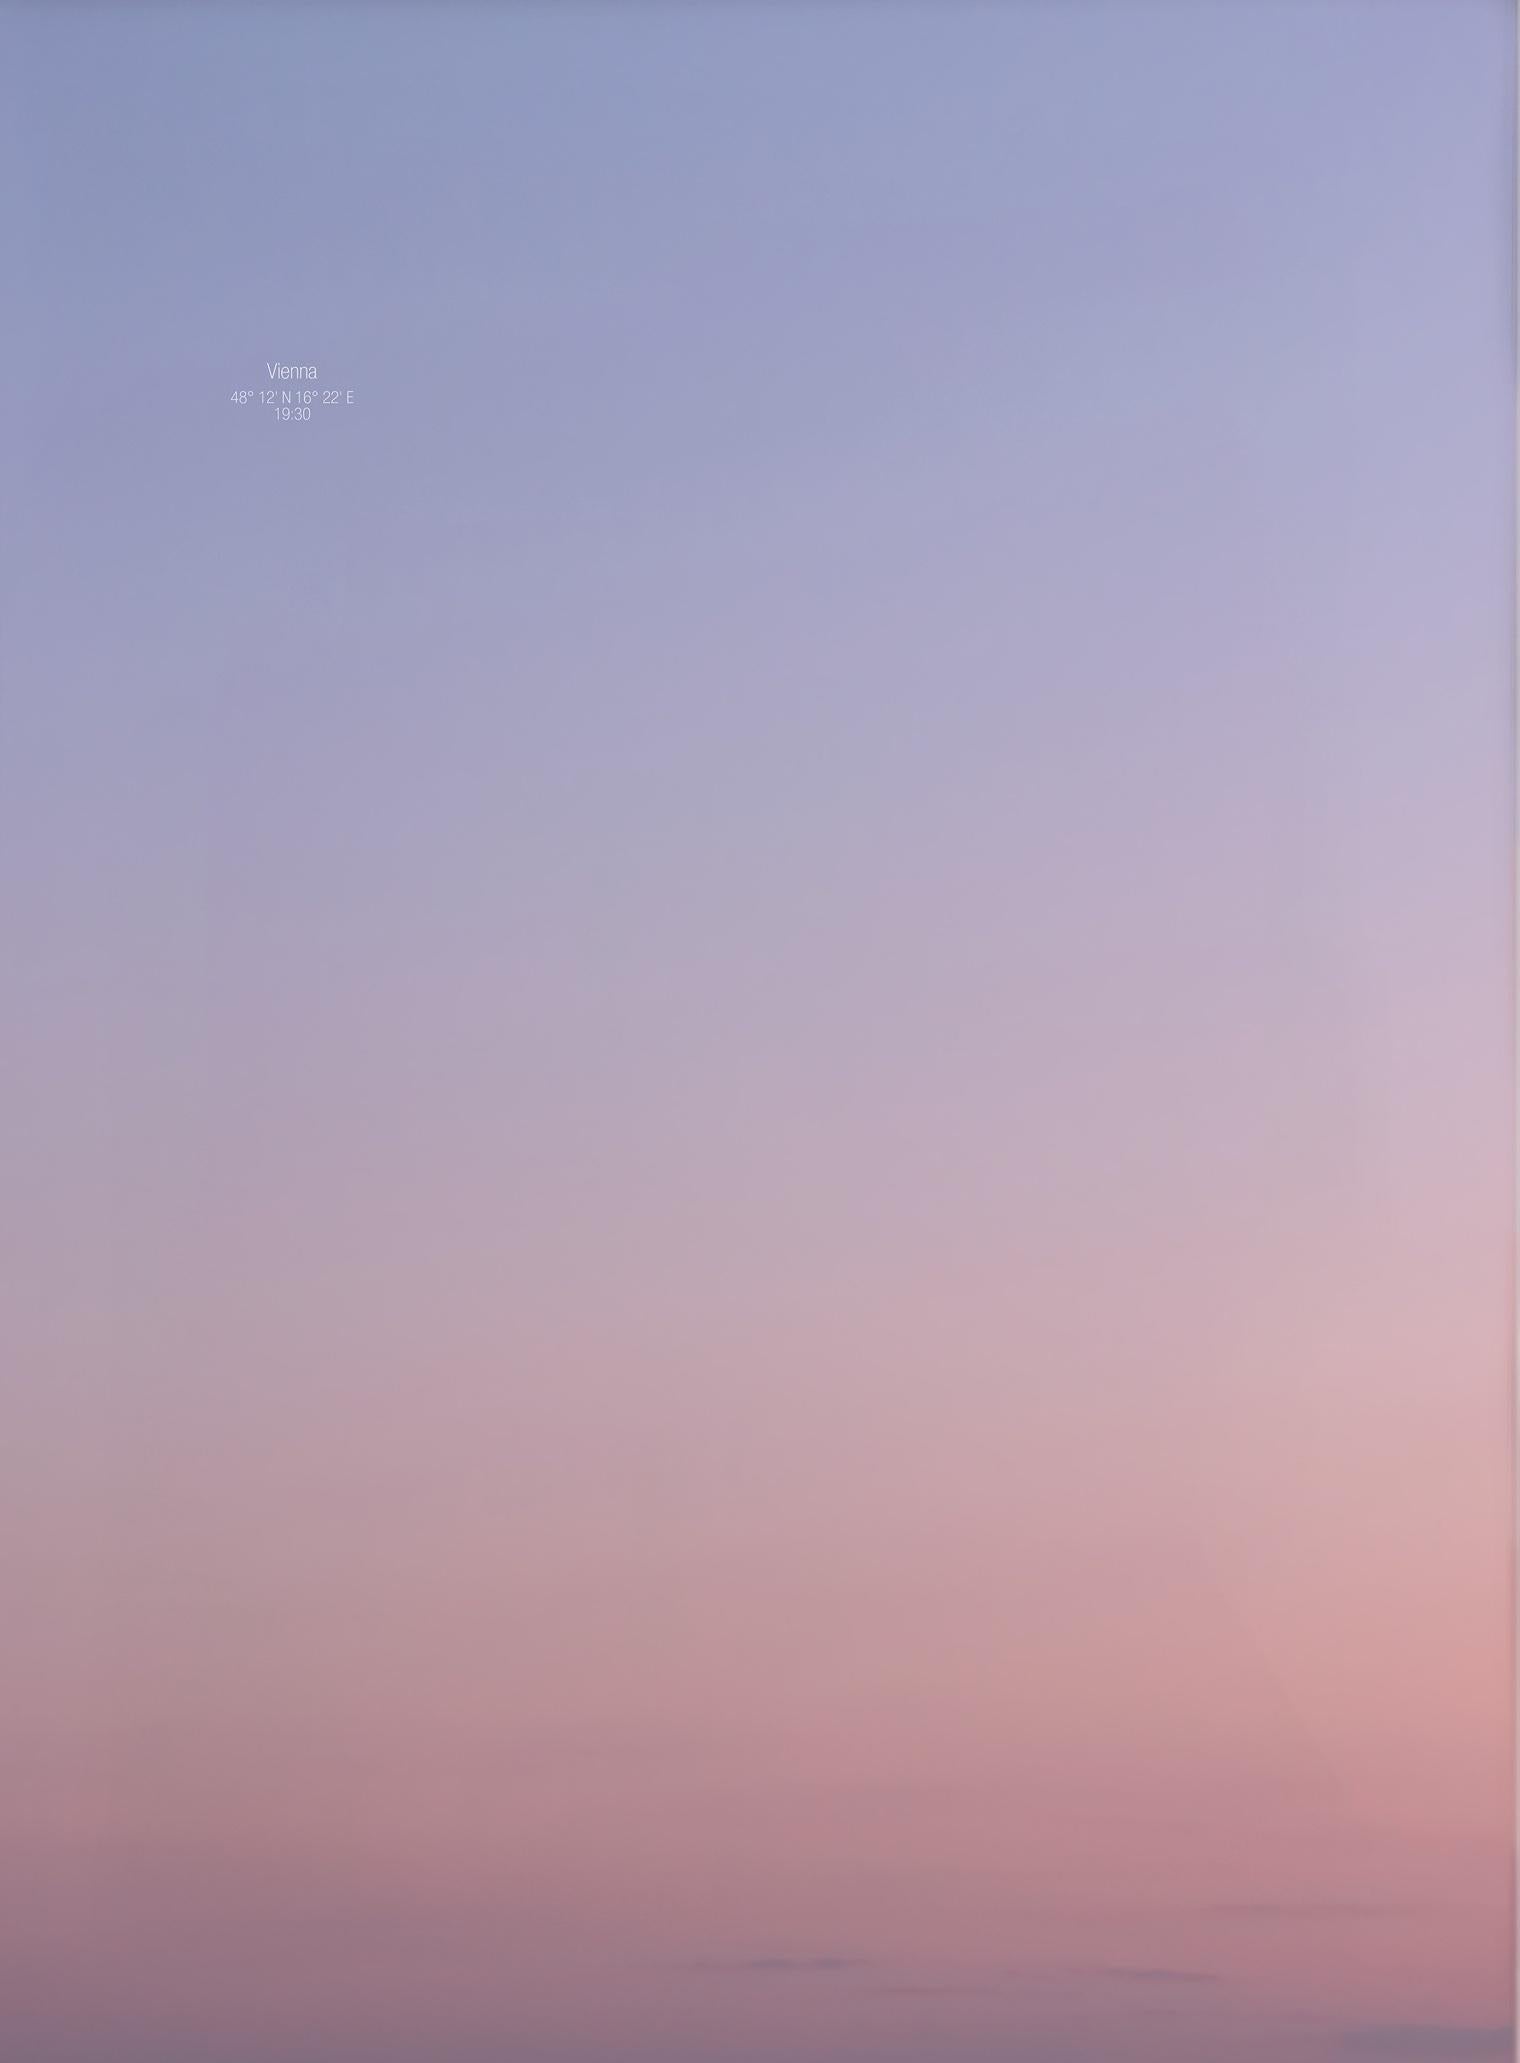 On the other Side of the Sky - 21st Century Abstract Color Photography Sunset
Trieste / Vienna, 19:30
Diptych, 2 pieces, 70 x 50 cm each
Edition 5+2 AP

When we look at the sky, we see pure color, even though it consists entirely of air which is